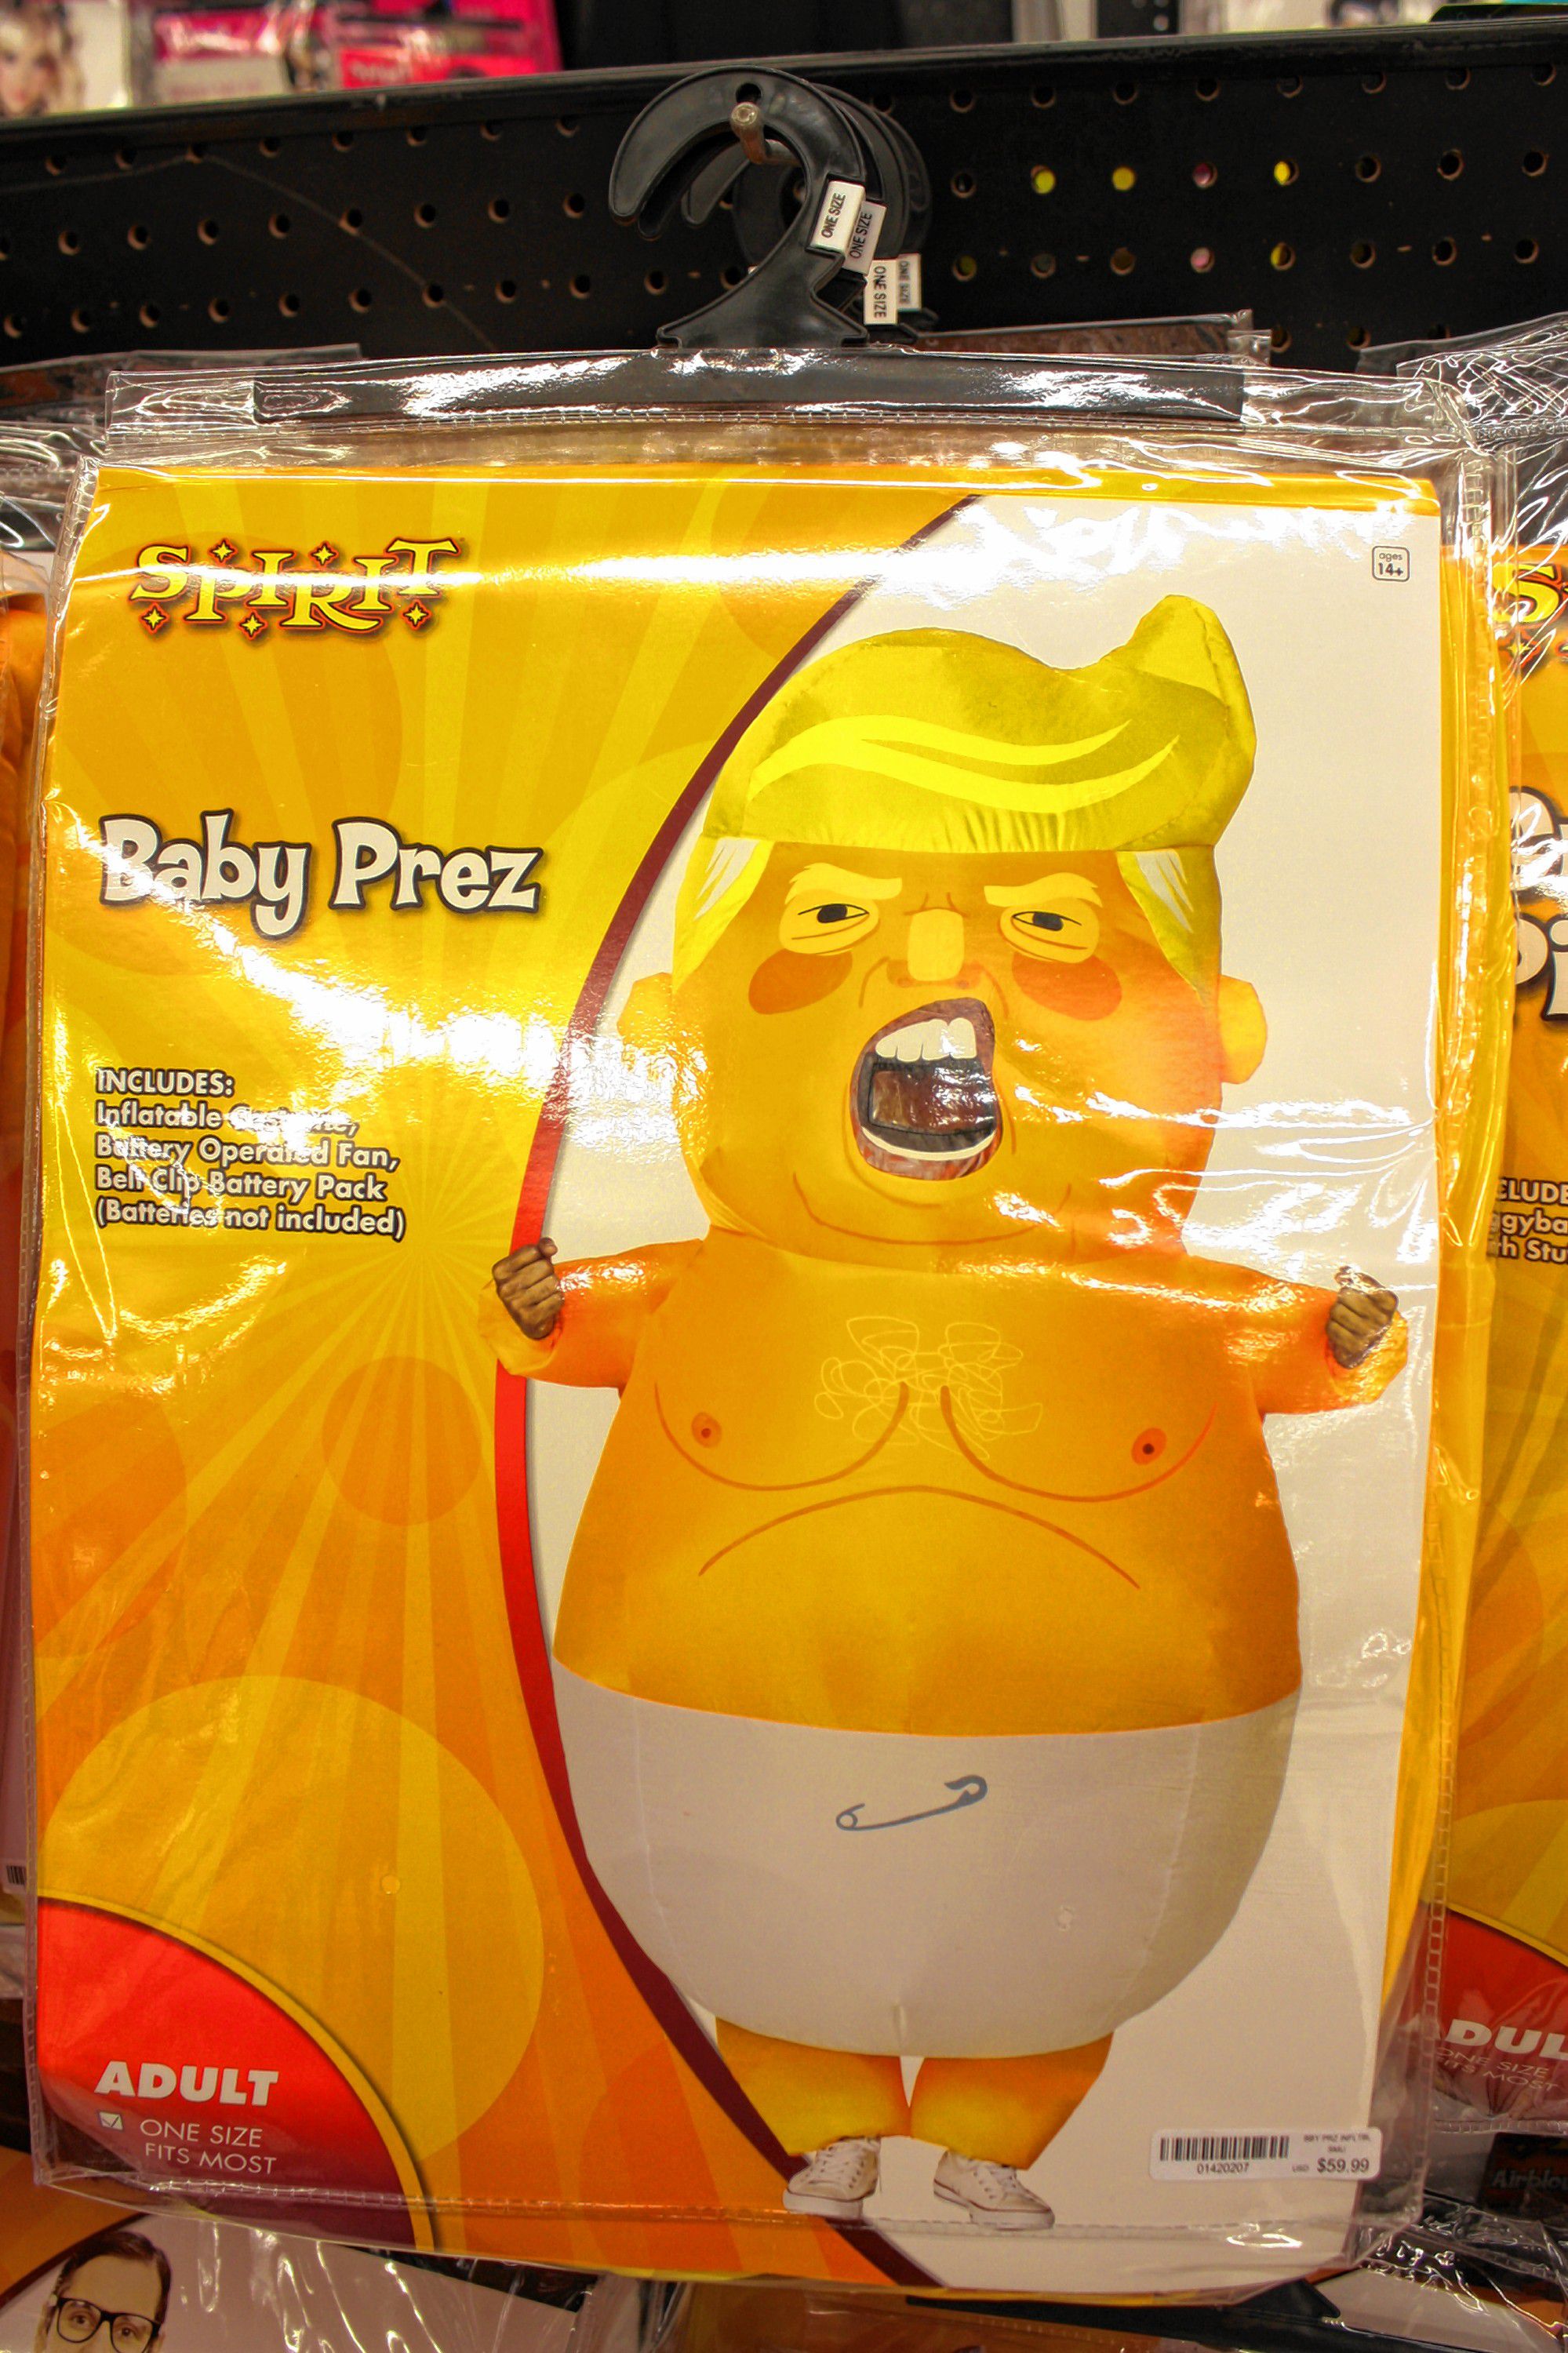 It wouldn't be Halloween without the obligatory gag presidential costume, such as this inflatable "Baby Prez" getup that resembles our sitting commander in chief.  JON BODELL / Insider staff